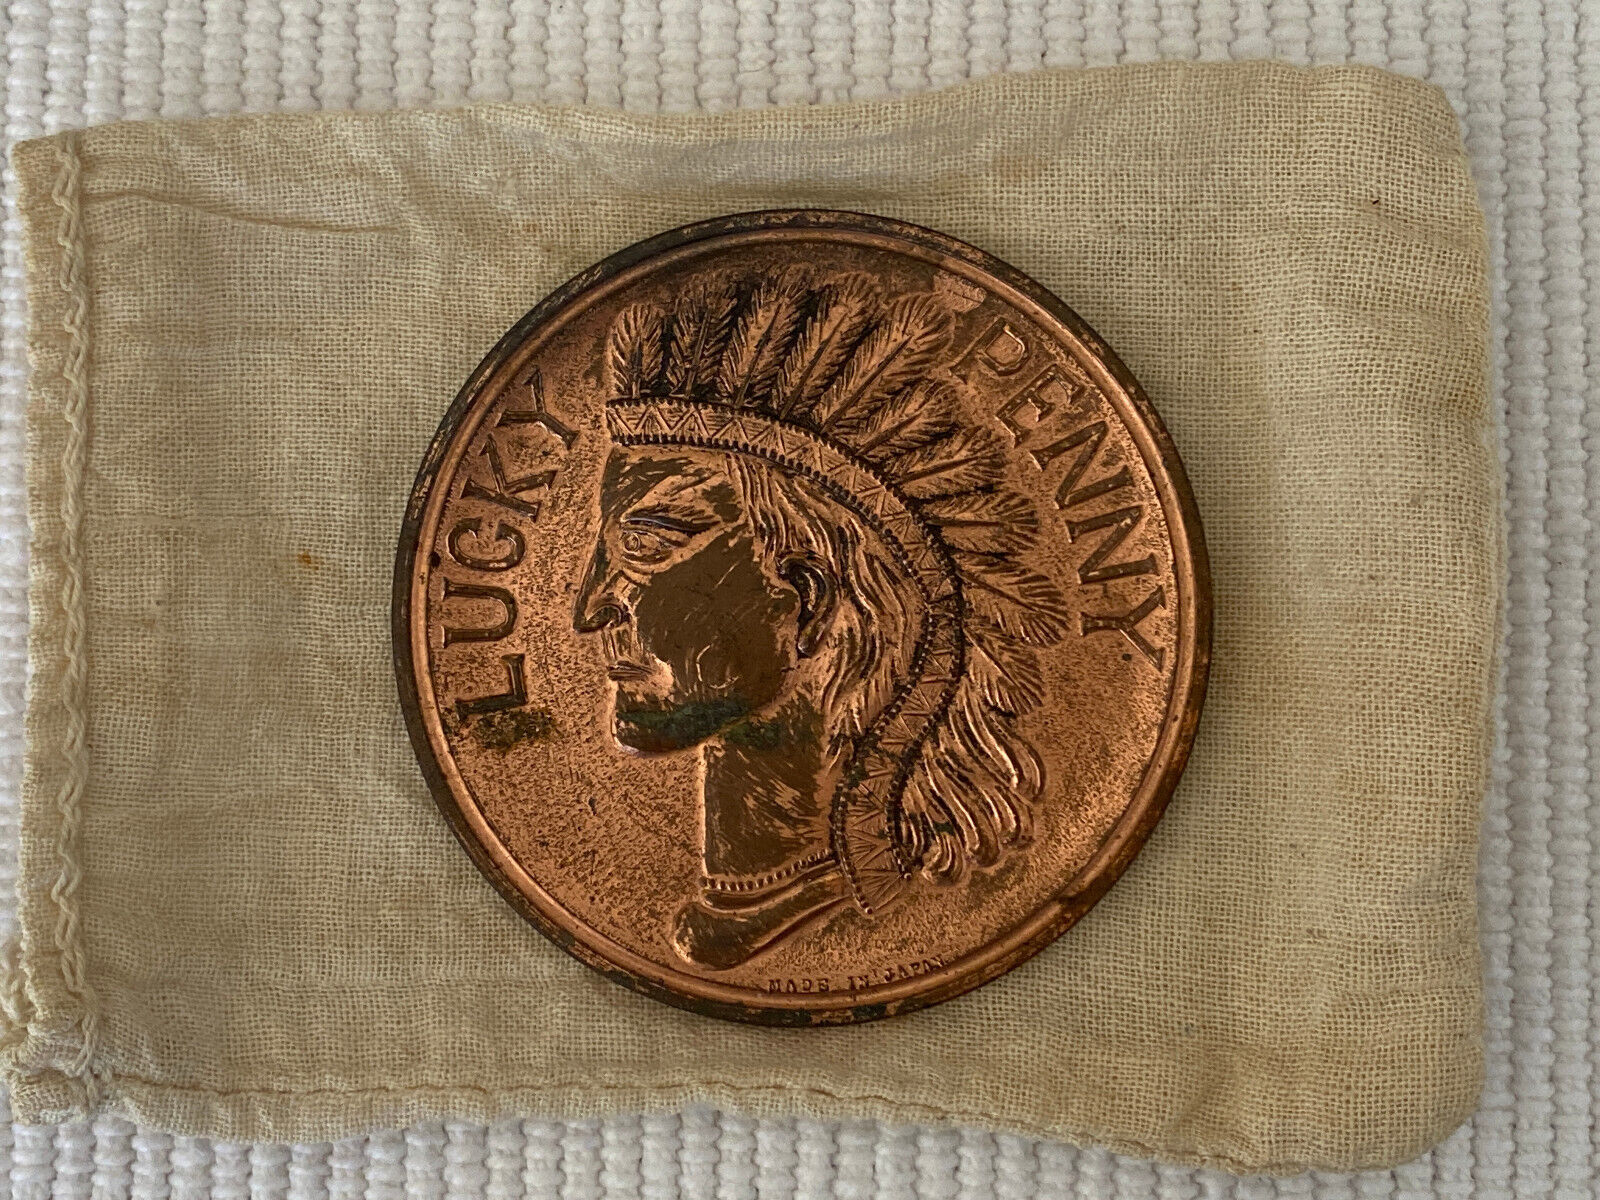 Vintage Niagara Falls Lucky Penny - Native American in Headress & View of Falls